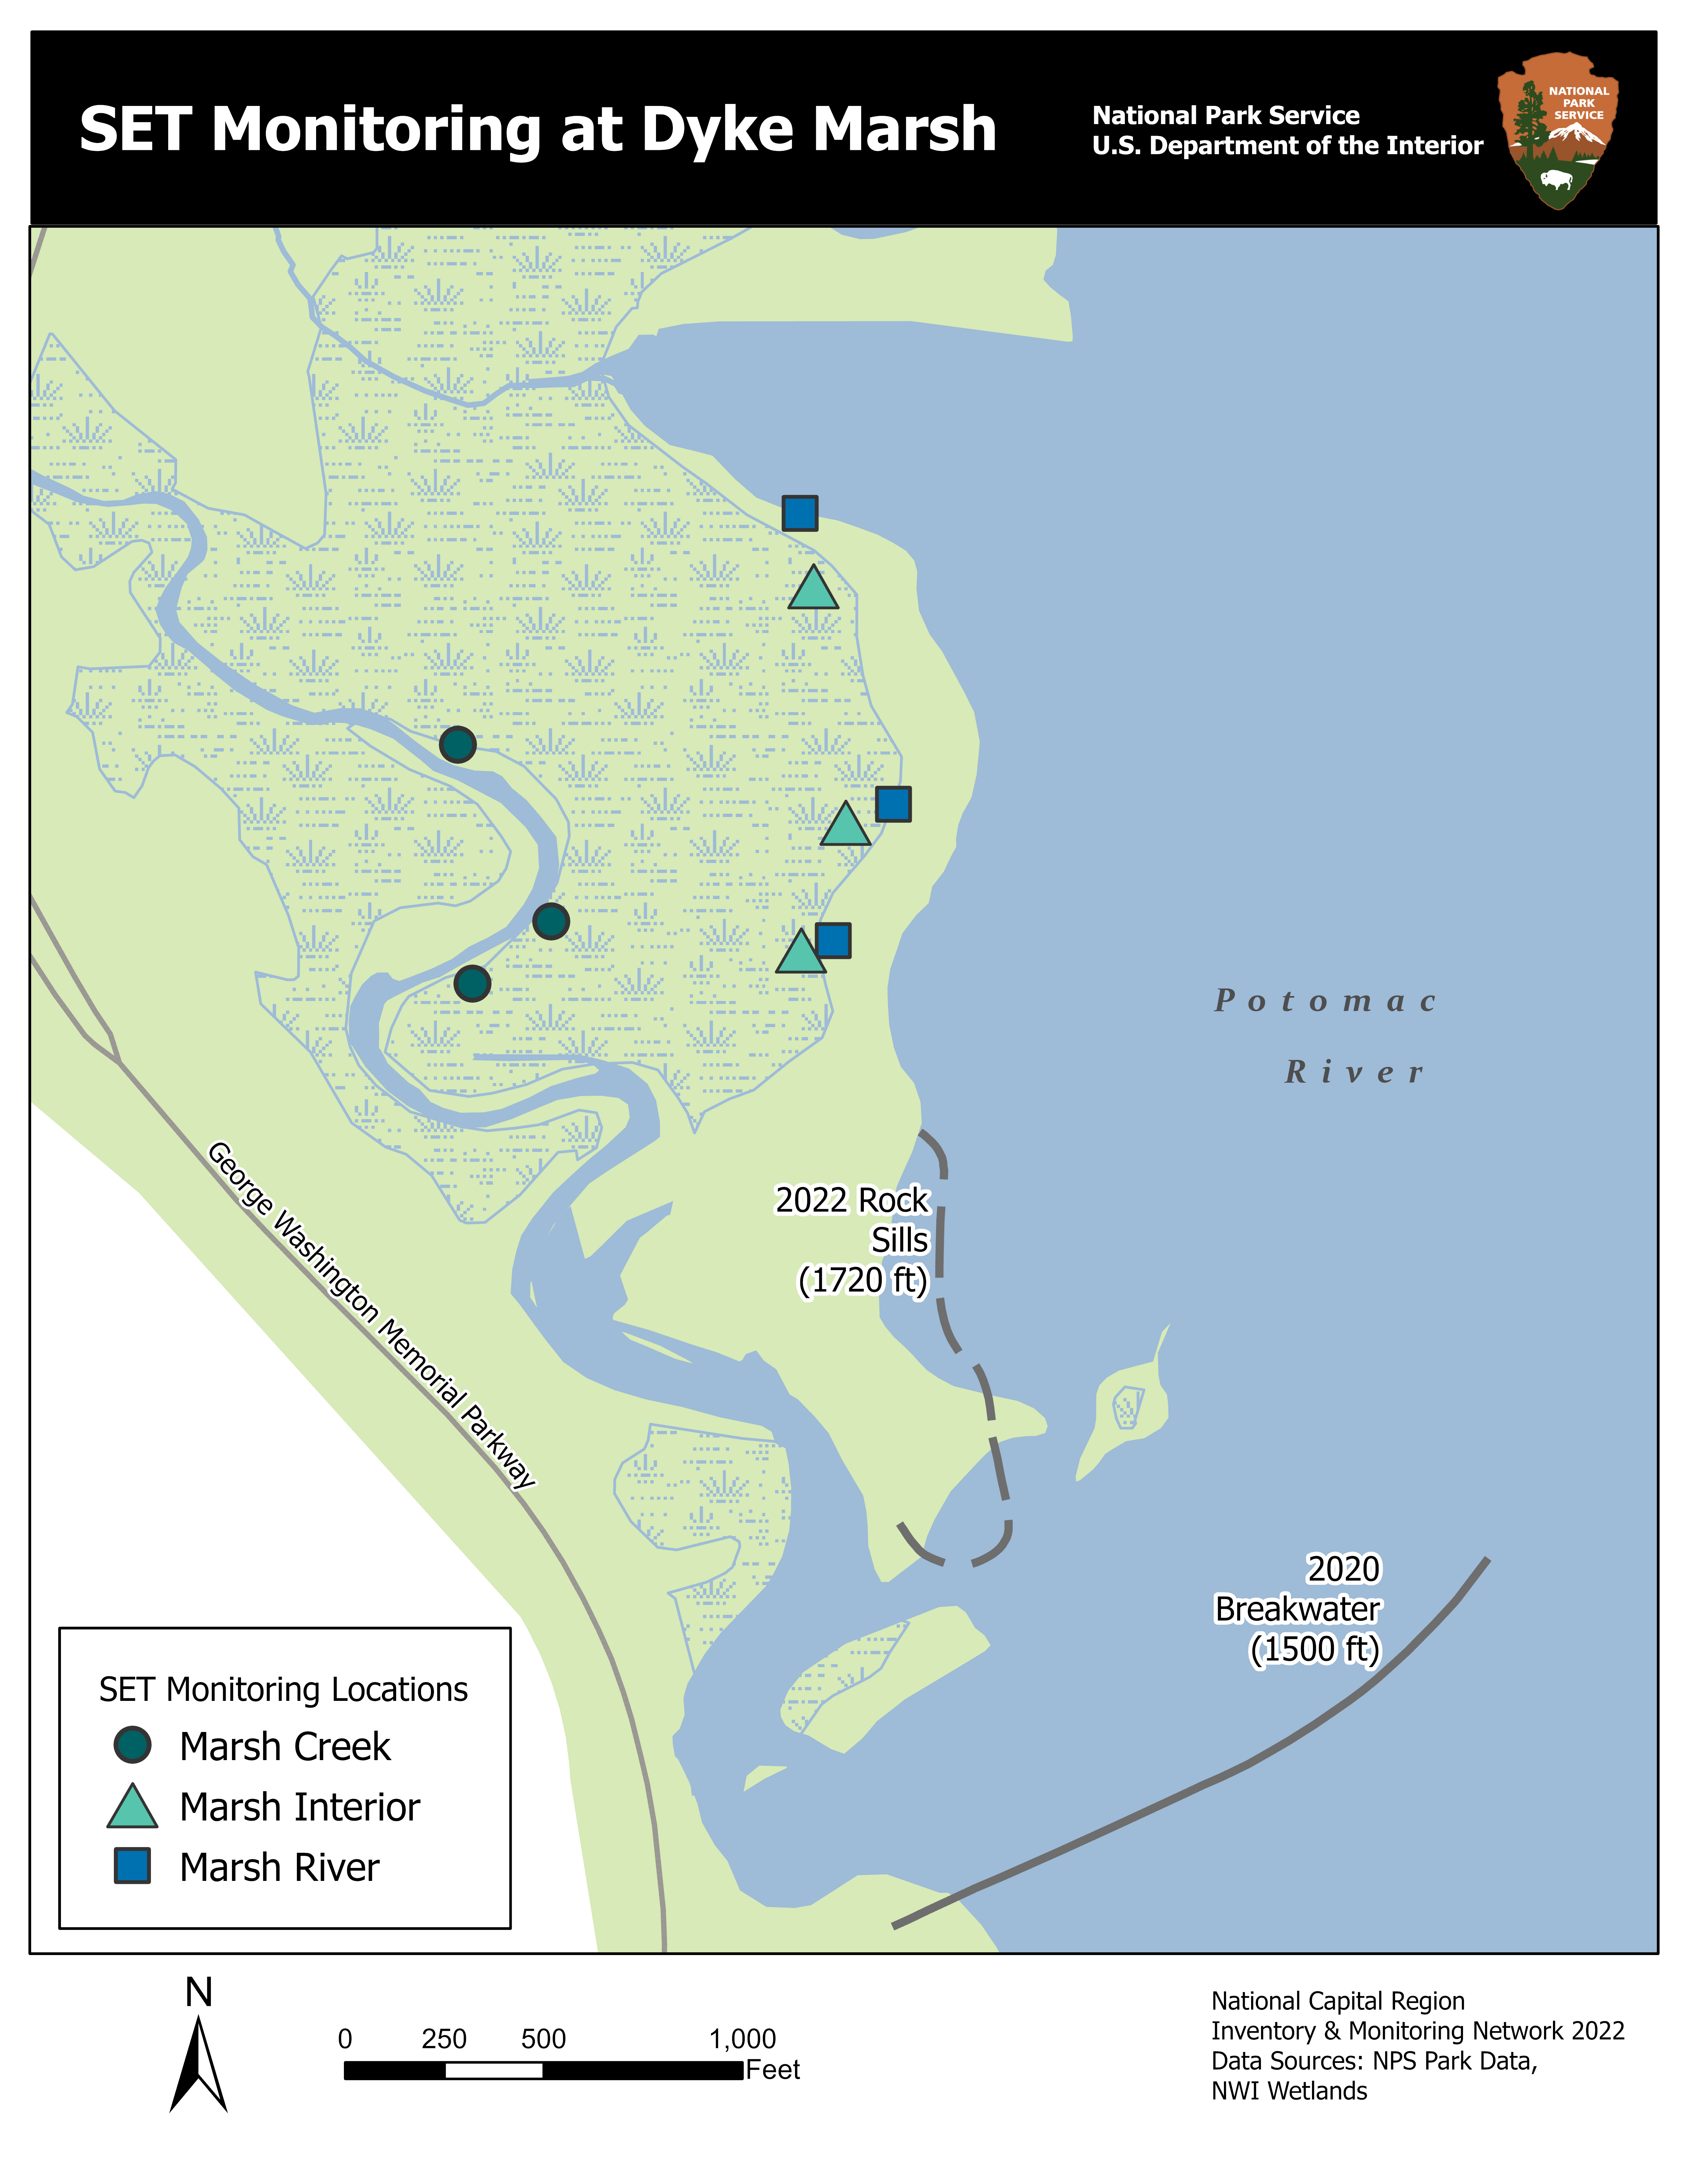 Map of Dyke Marsh with the marsh in green and the Potomac River in blue. The SET monitoring sites are symbolized with green circles for the three creek sites, light green triangles for the three interior sites, and blue squares for the three river sites.